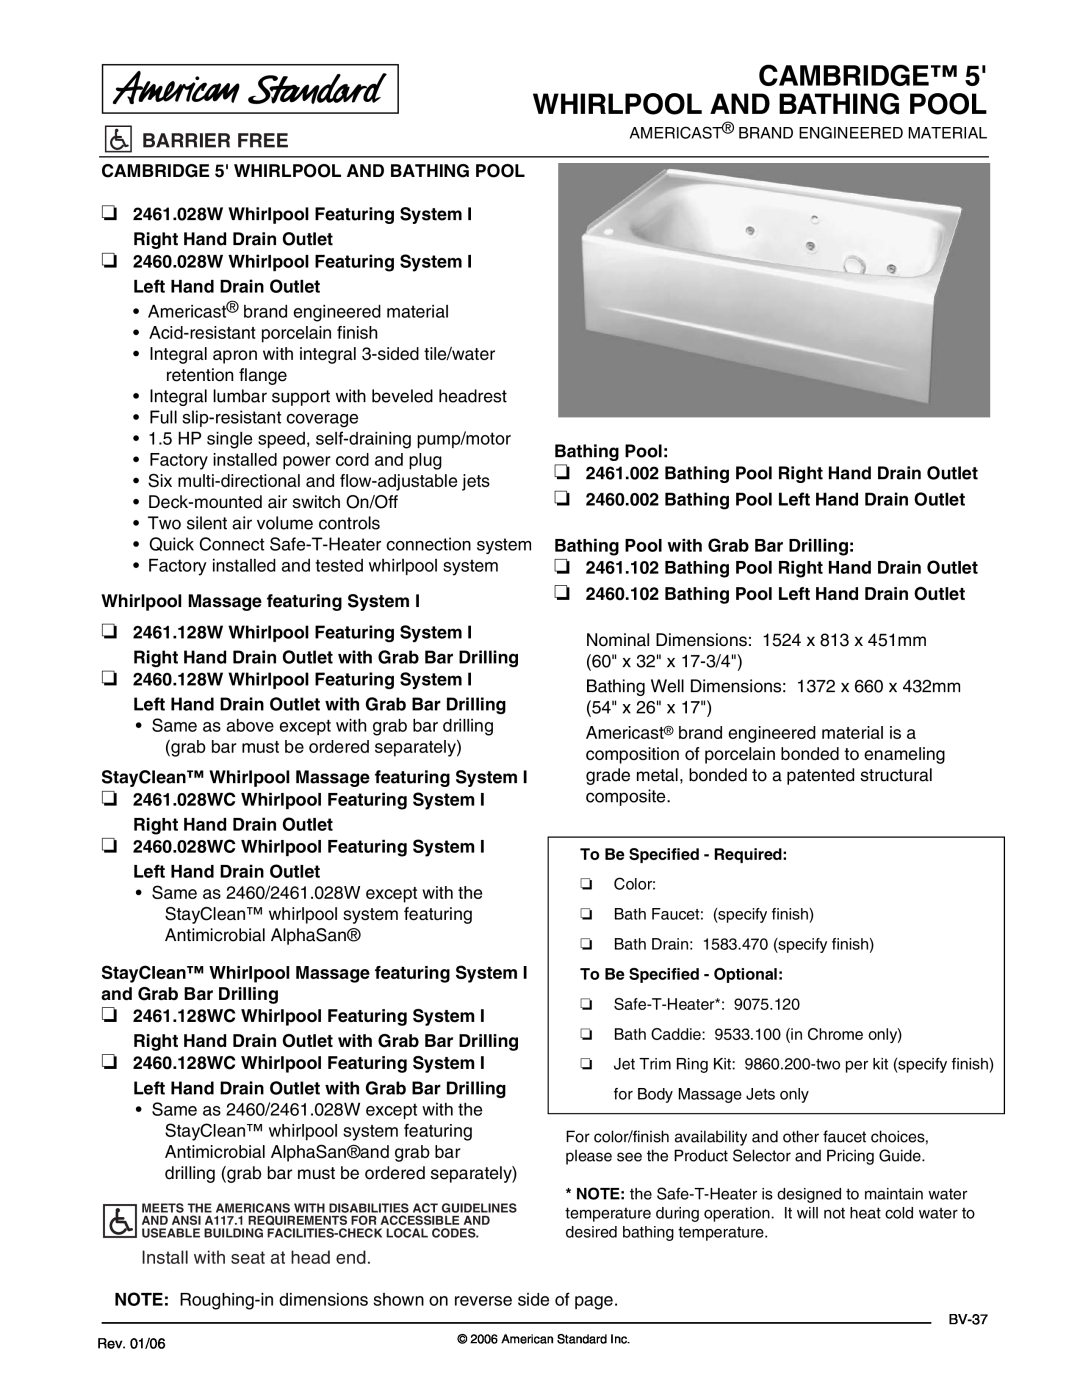 American Standard 2460.028W dimensions Cambridge Whirlpool And Bathing Pool, Barrier Free, Install with seat at head end 